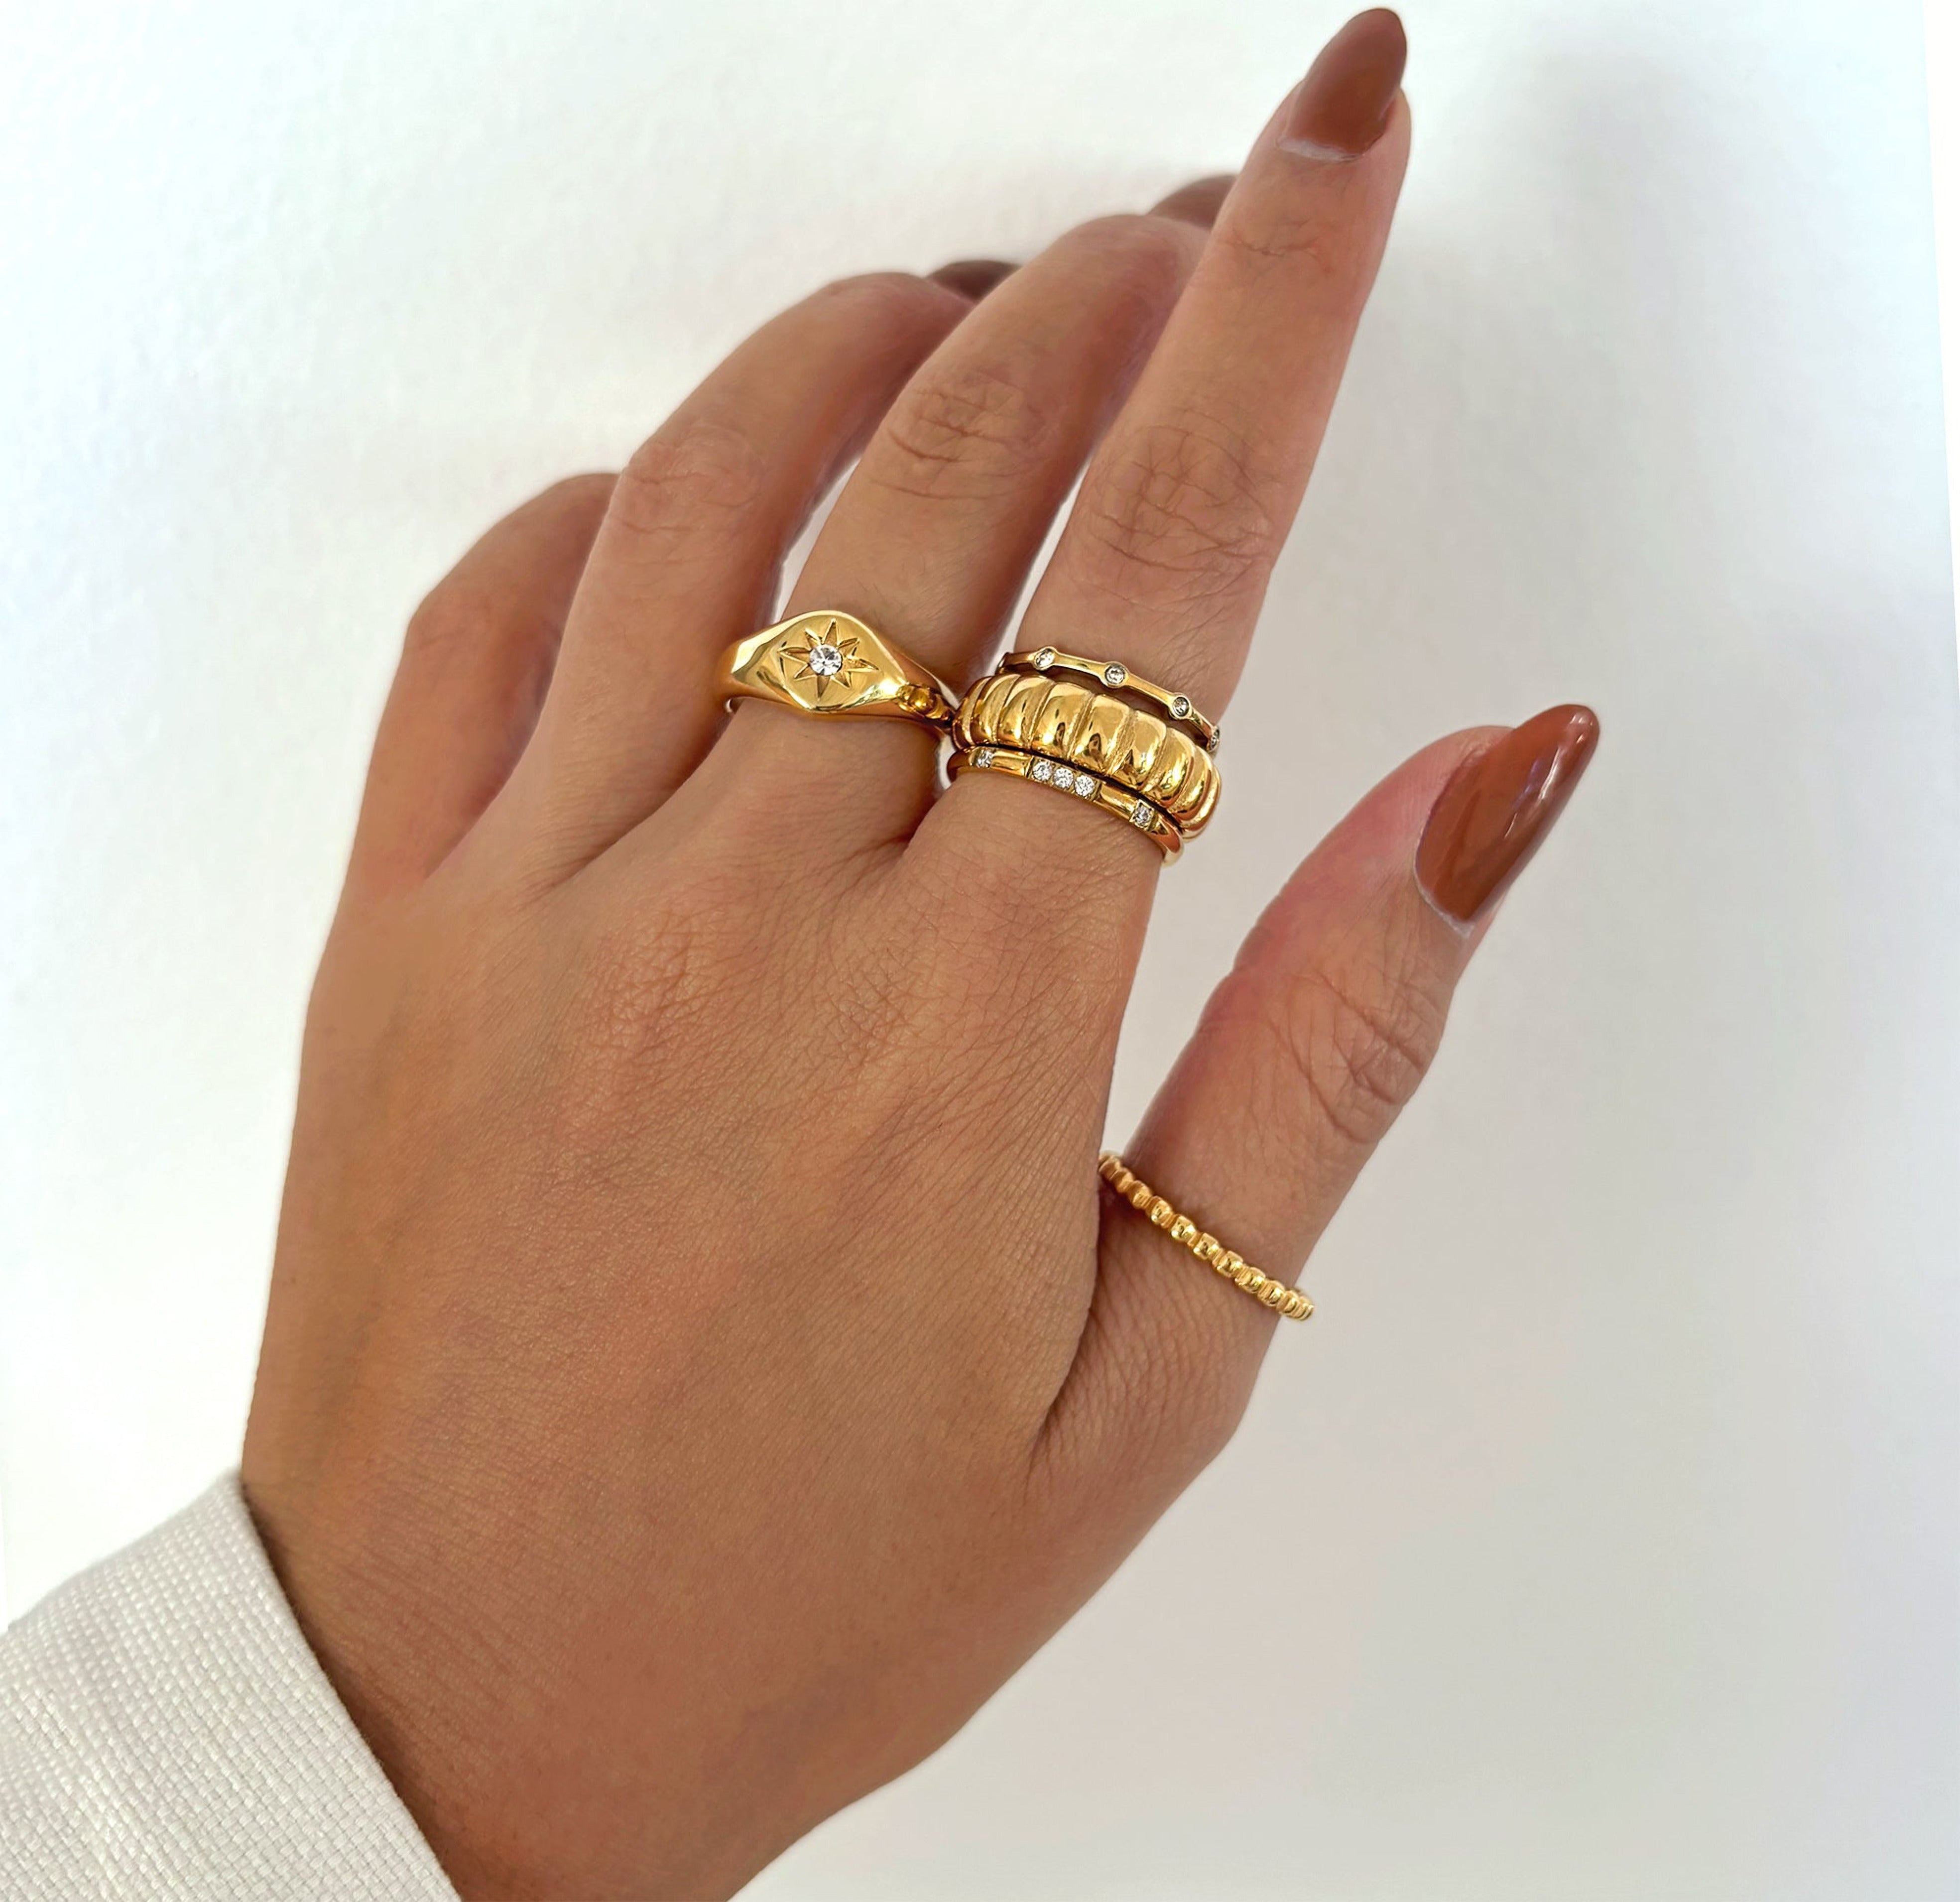 gold ribbed ring stacked with dainty pave ring and august starburst signet ring. Waterproof jewelry